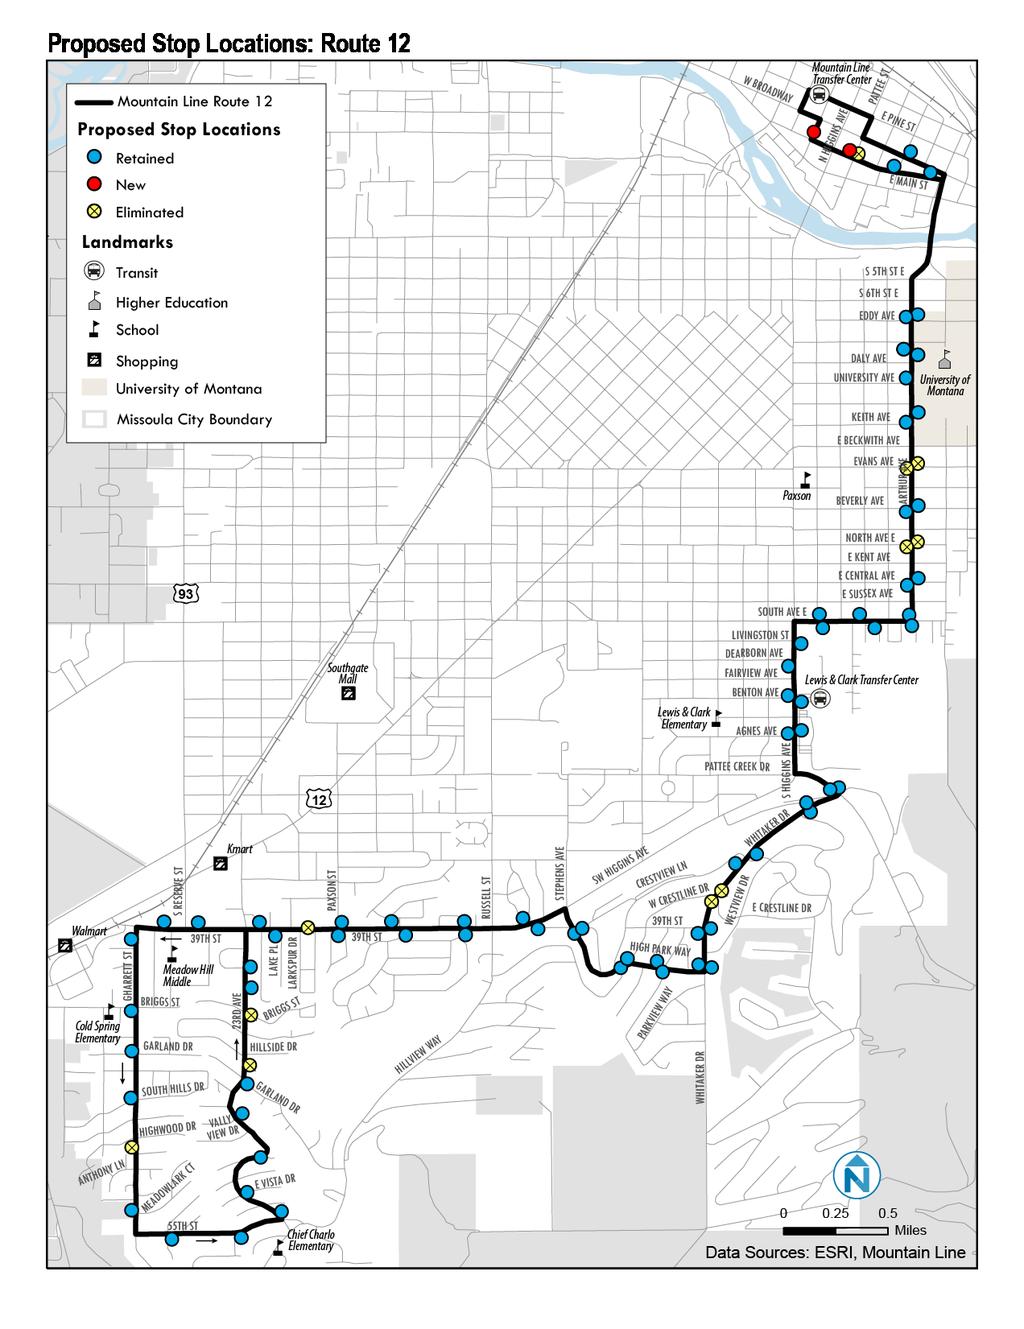 Proposed Stop Changes Route 12